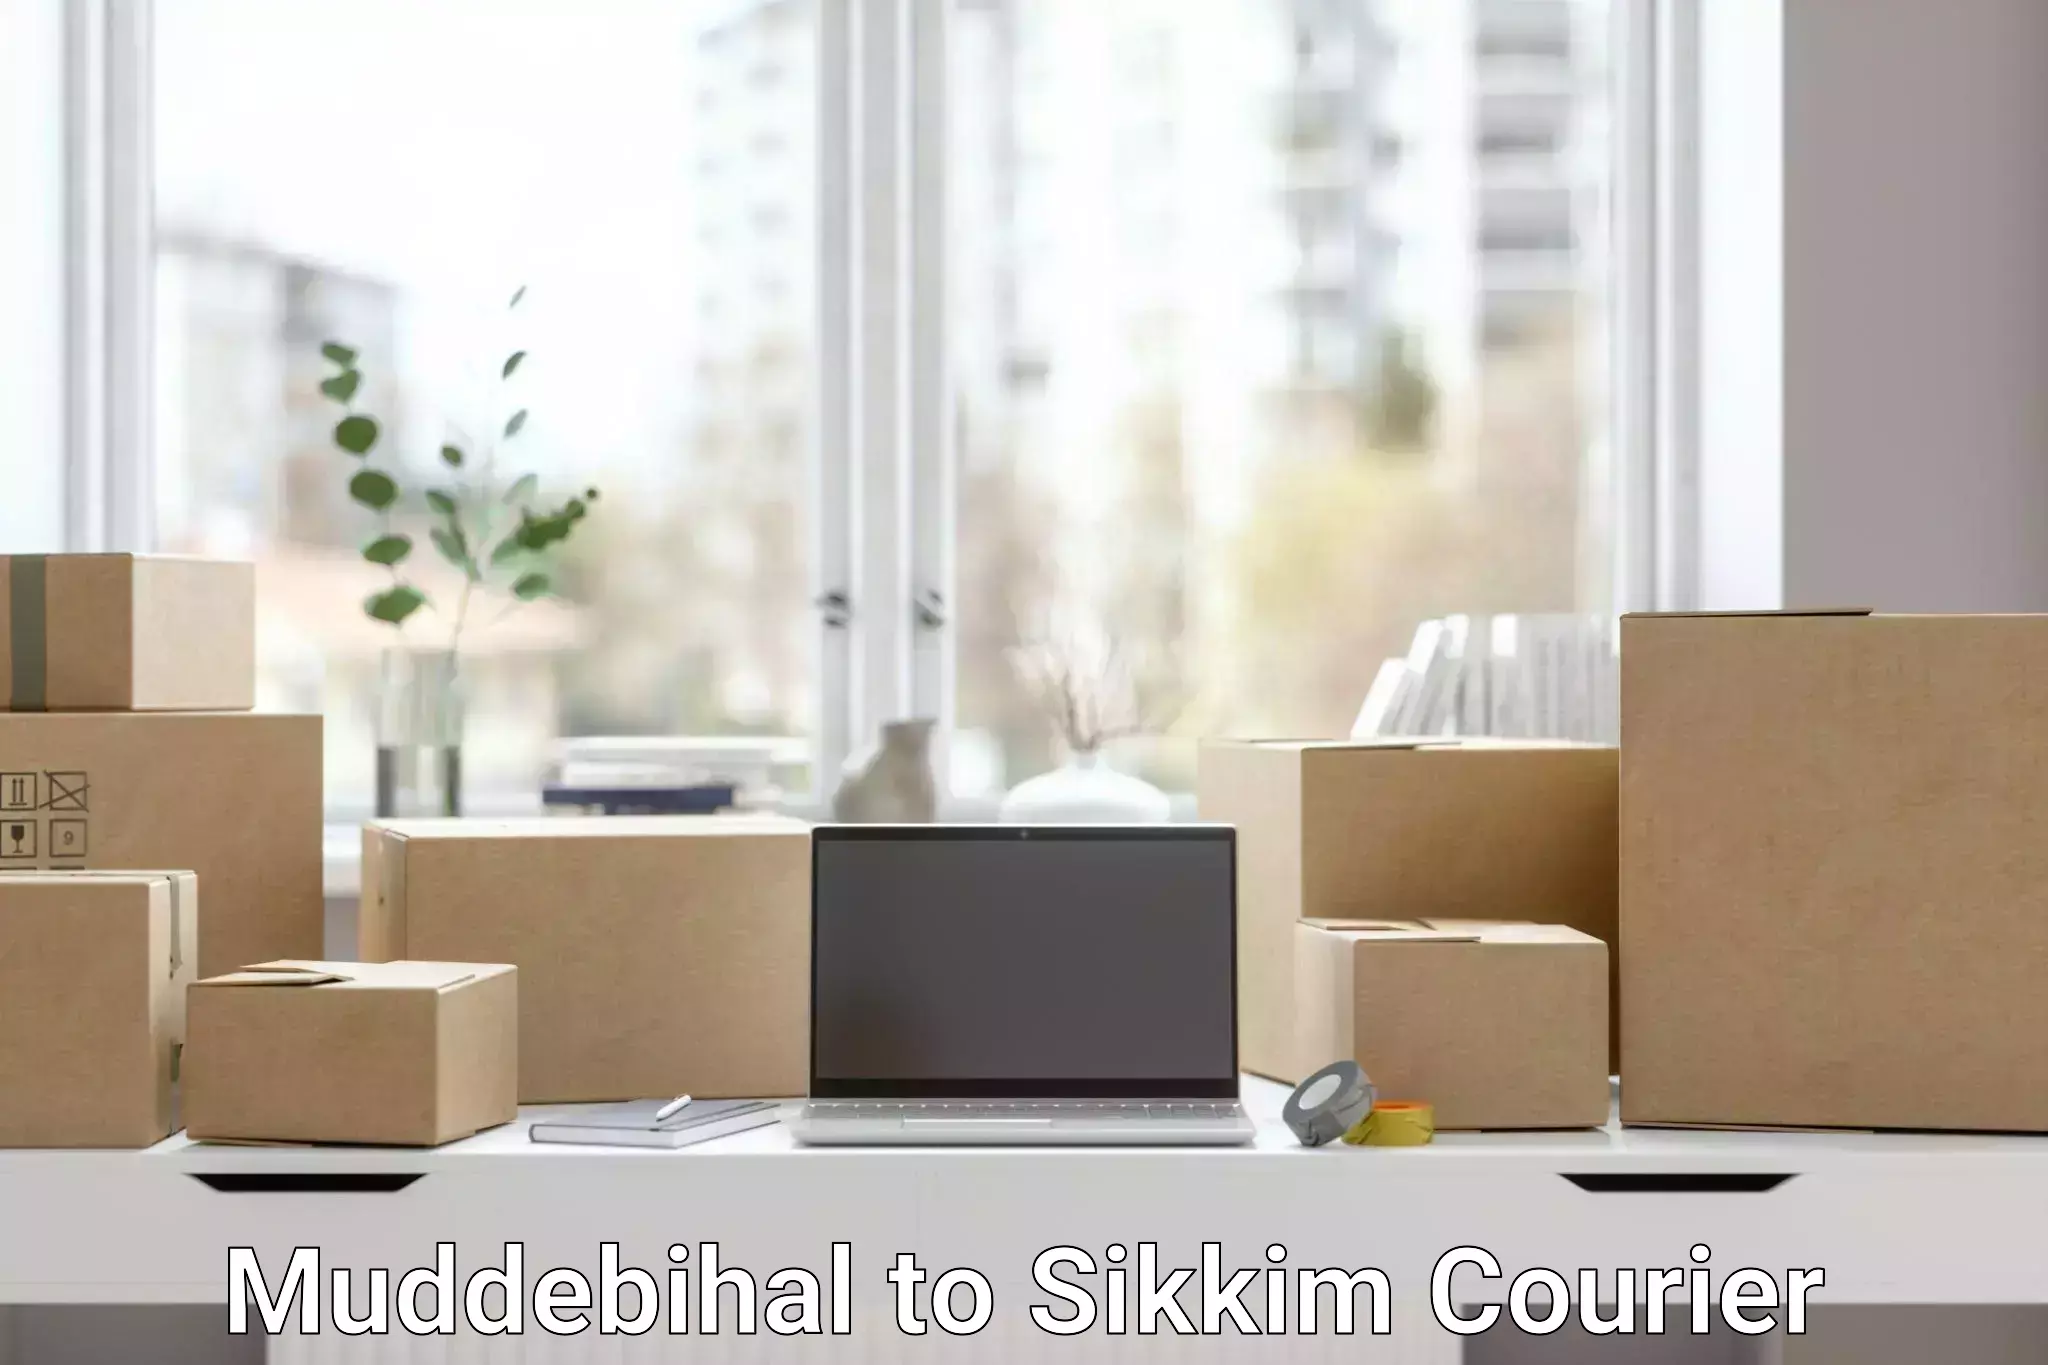 Discounted shipping Muddebihal to North Sikkim